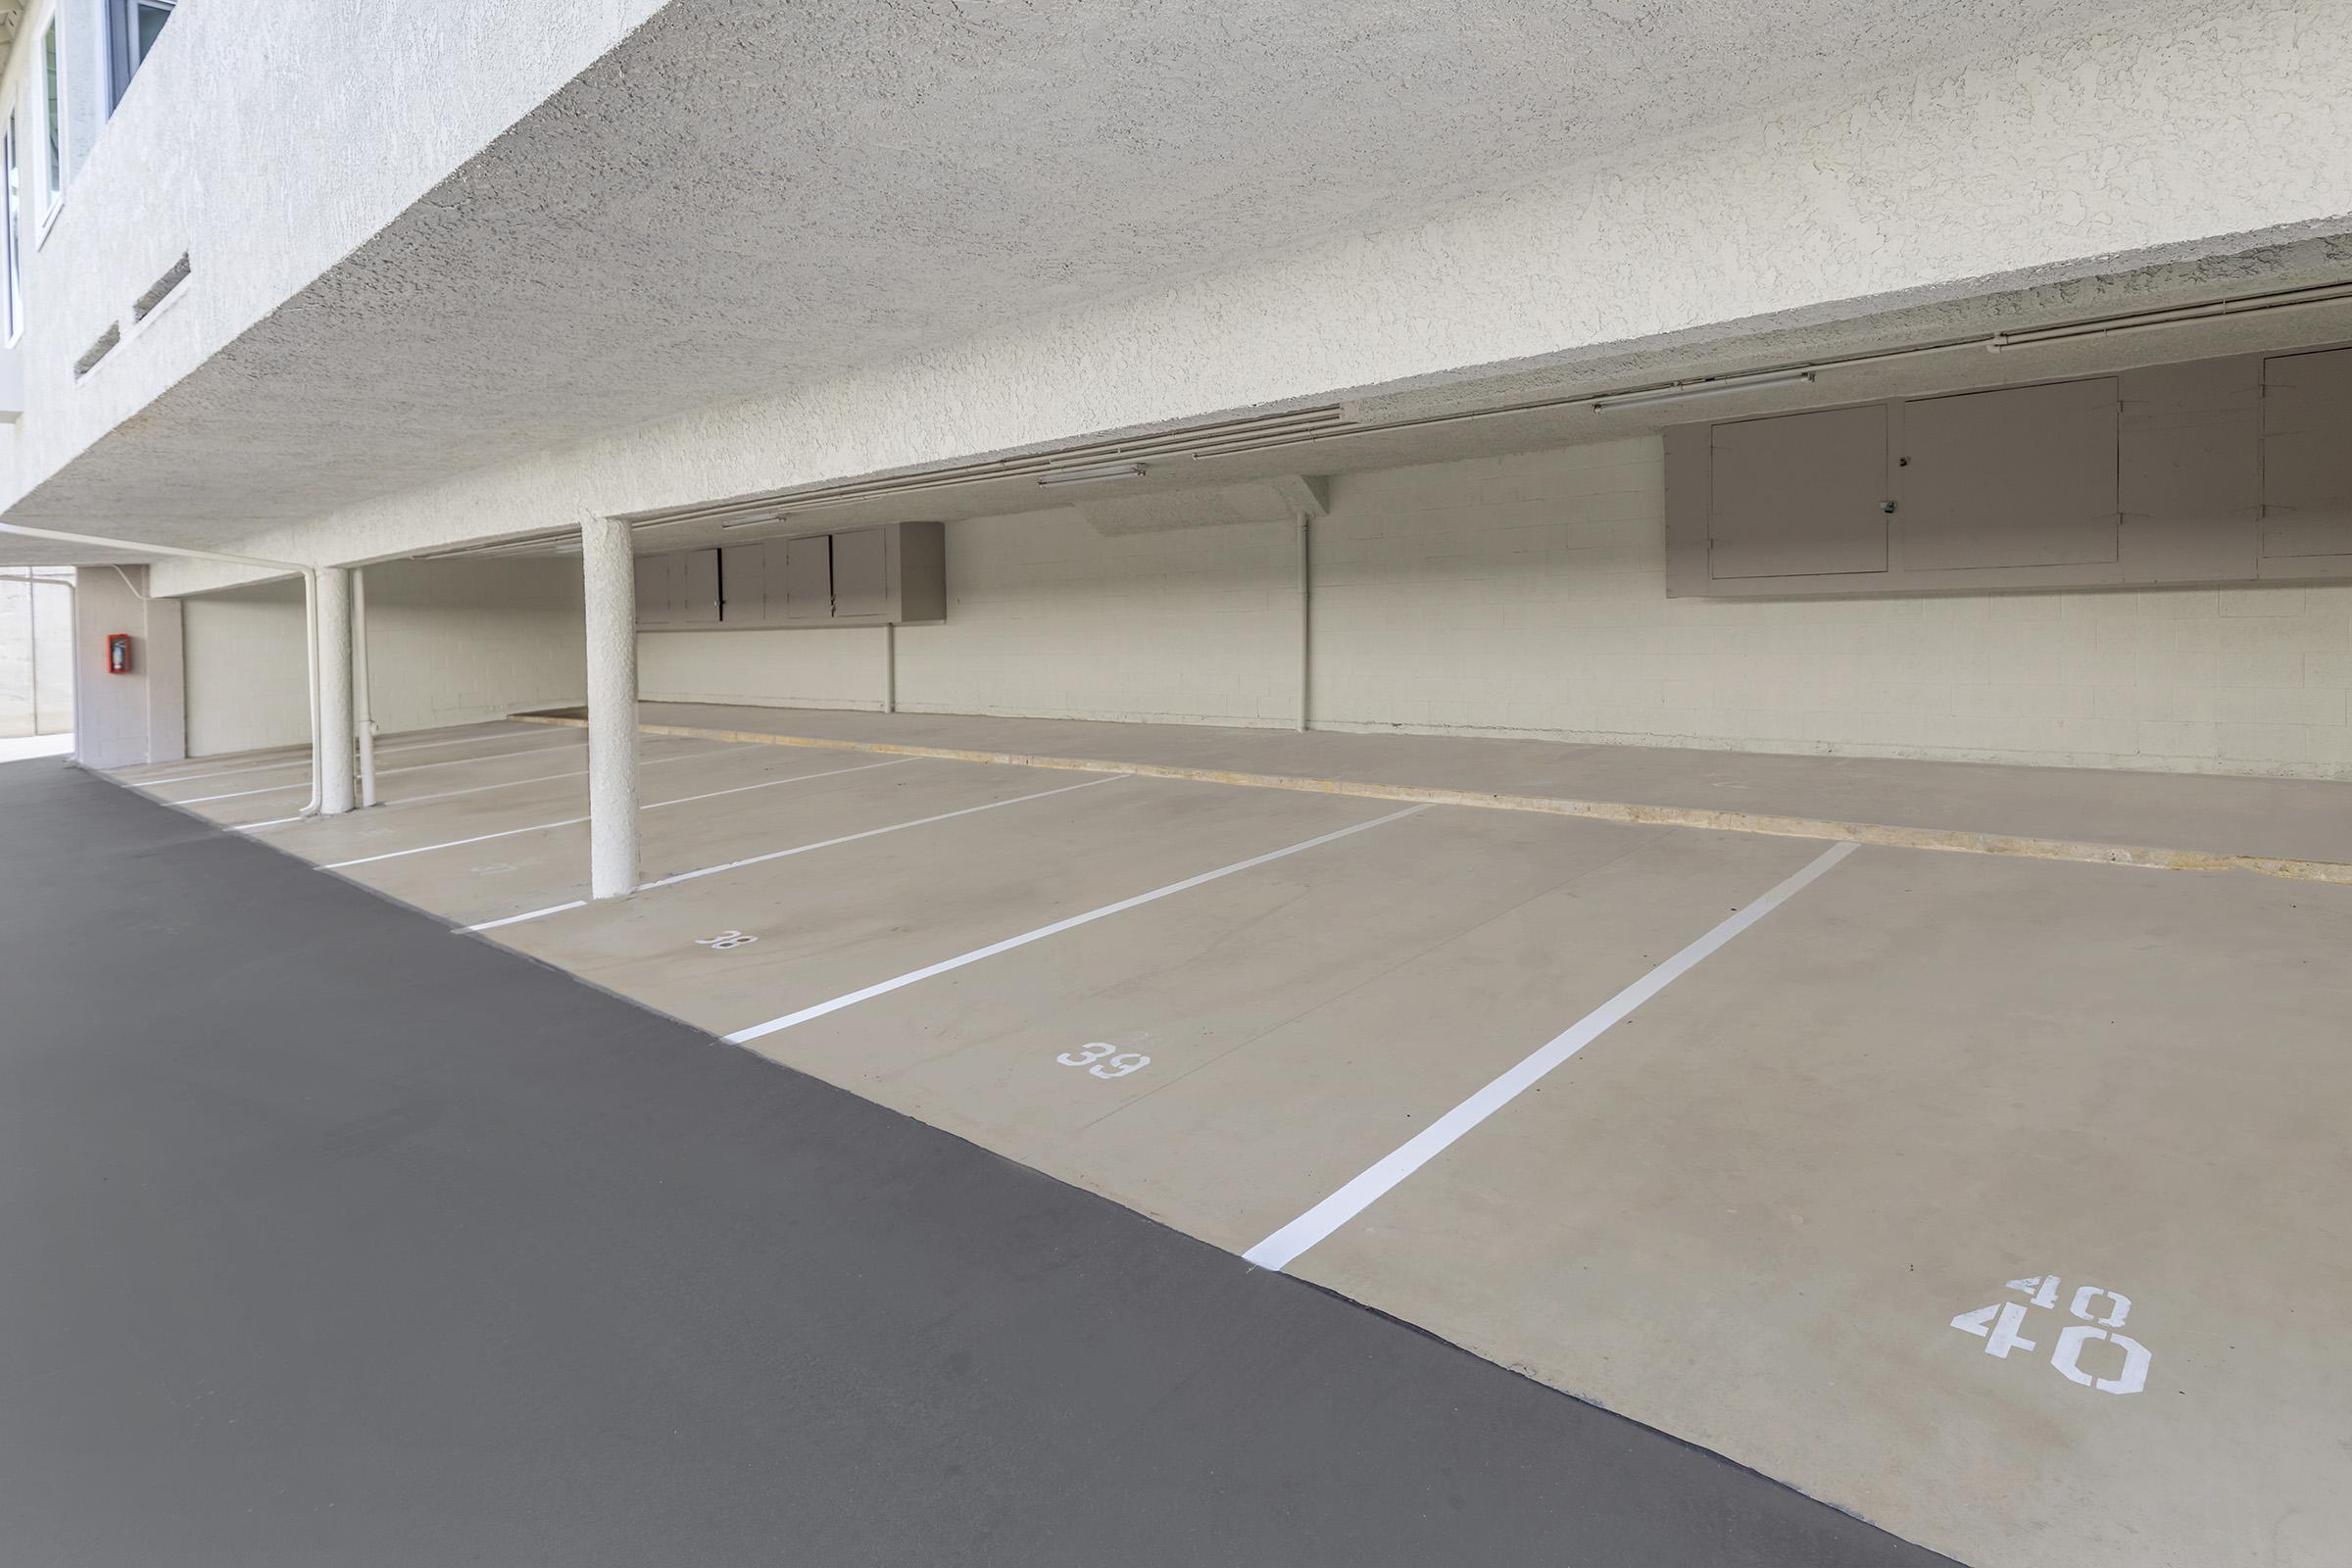 an empty parking lot in front of a building